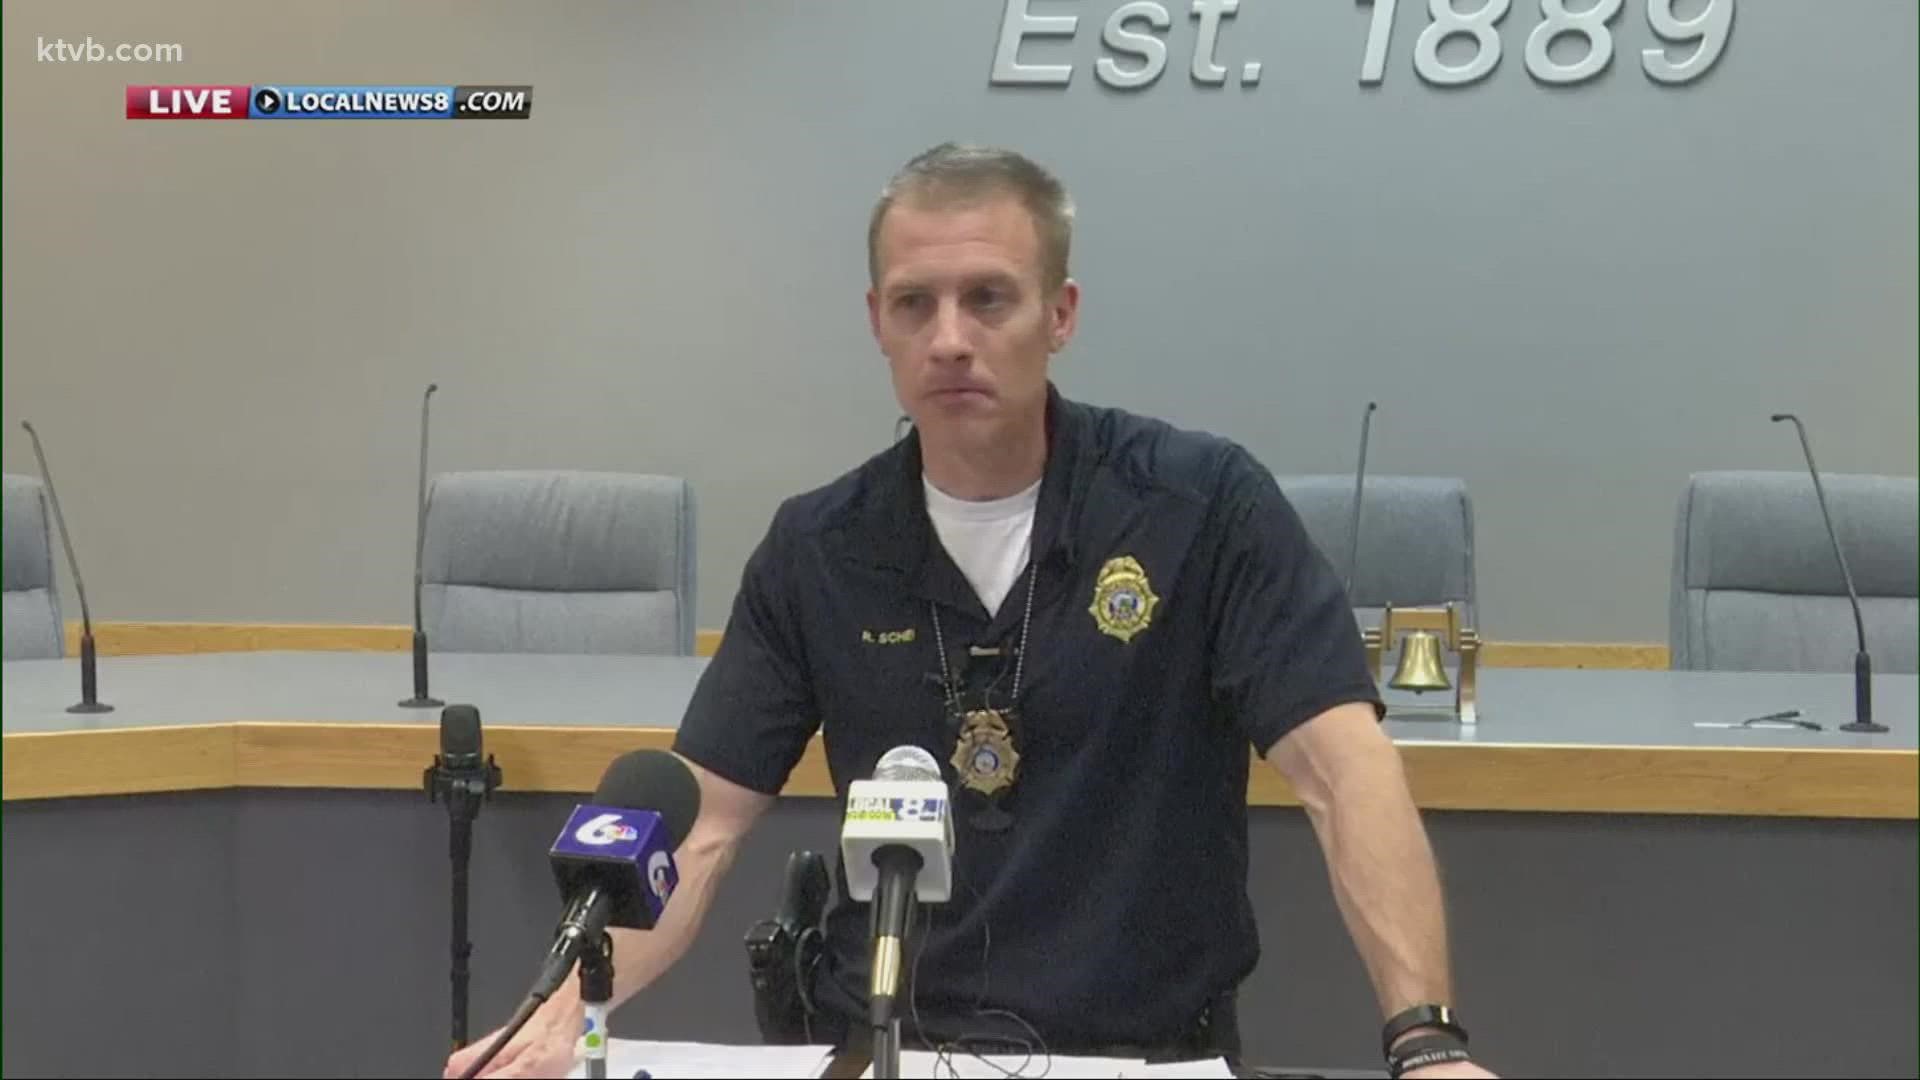 Both officers and the suspect are in stable condition, according to Chief Roger Schei.